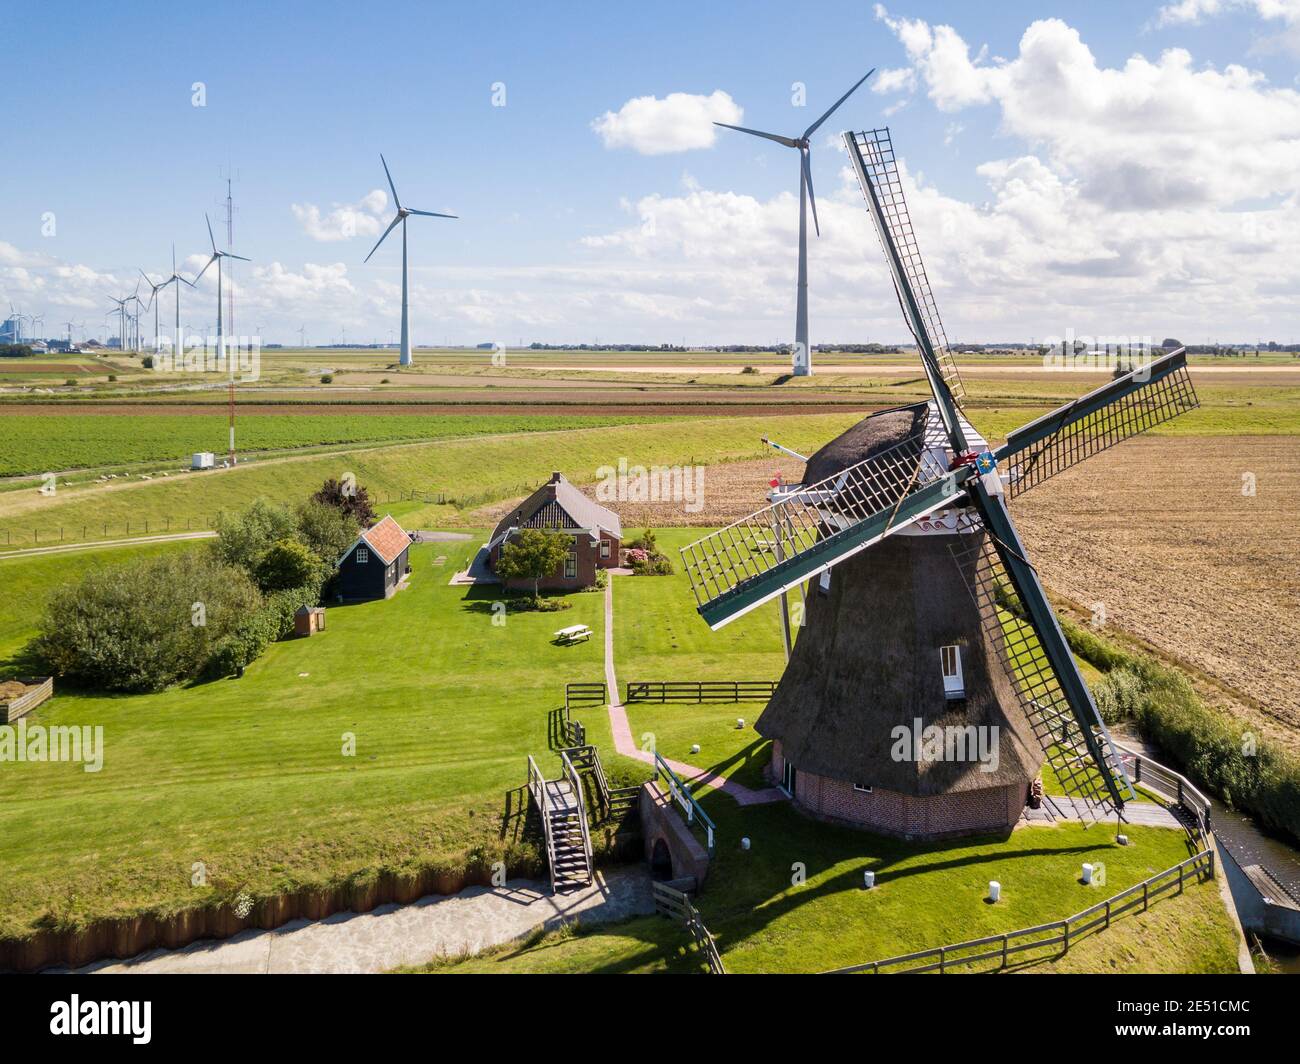 Aerial wide angle view of an ancient windmill against large wind farm of modern wind turbines Stock Photo